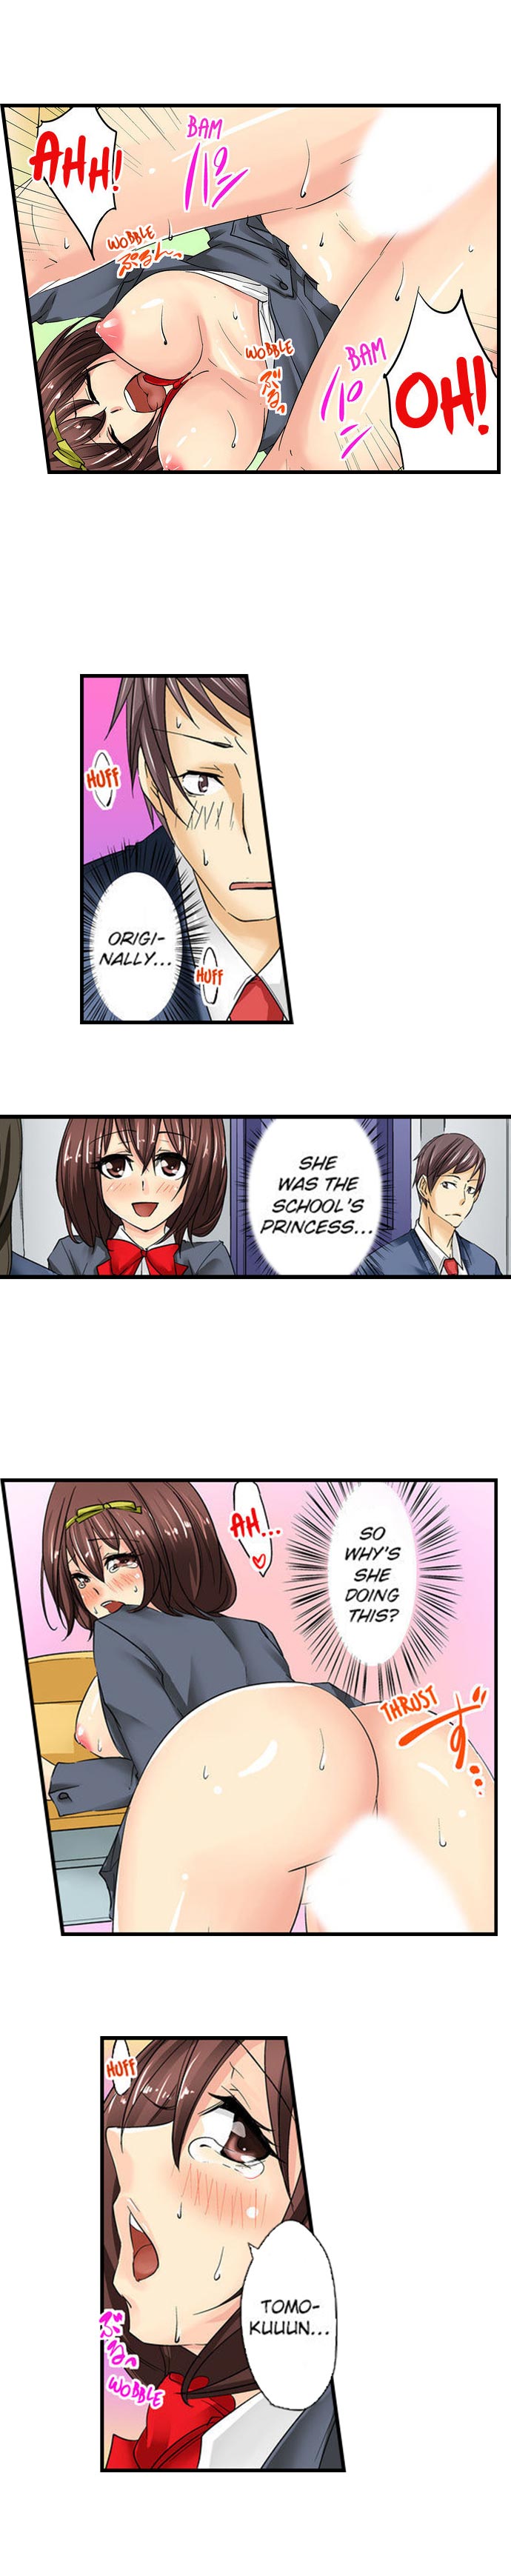 Porn Actor Debut...With My Childhood Friend!? - Chapter 5 Page 4